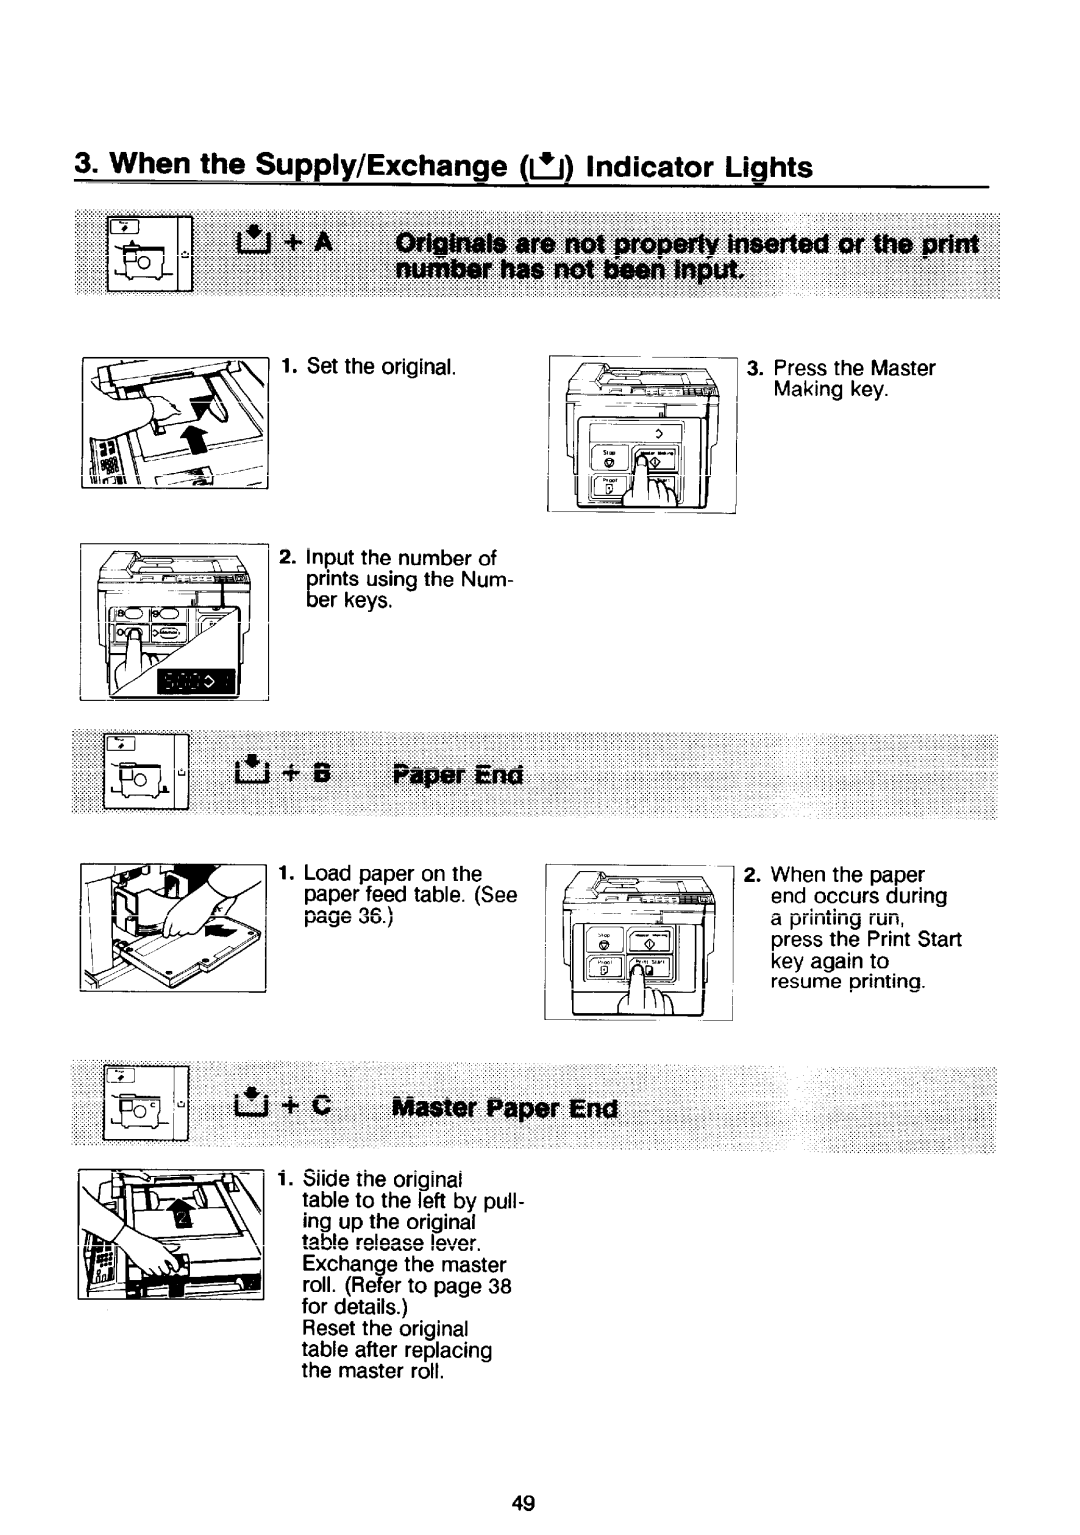 Ricoh PRIPORT VT2130 manual When the Supply/Exchange fi Indicator Lights 